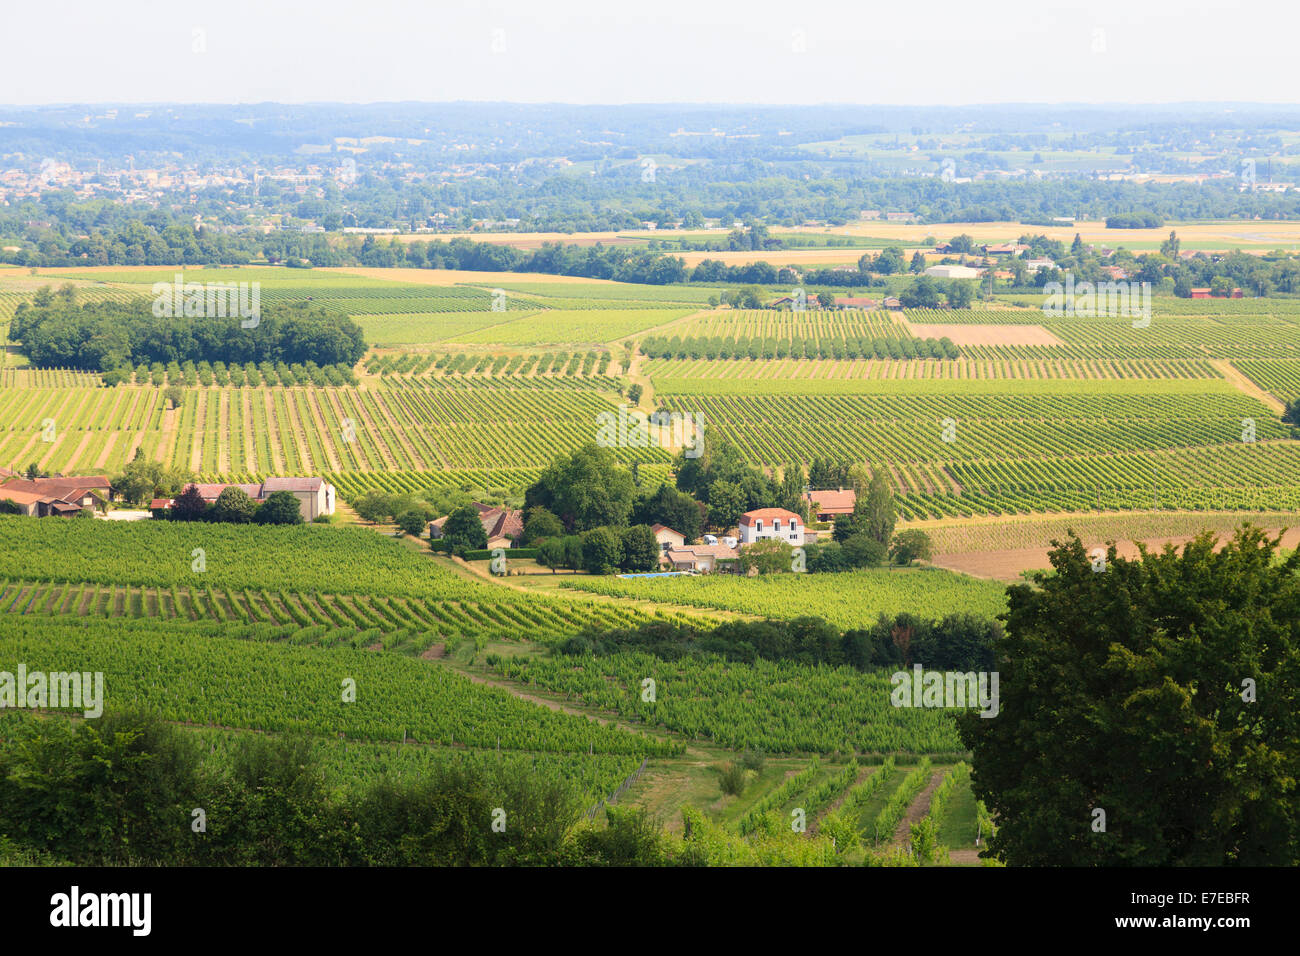 The wine growing countryside around the Chateau de Monbazillac France. Stock Photo